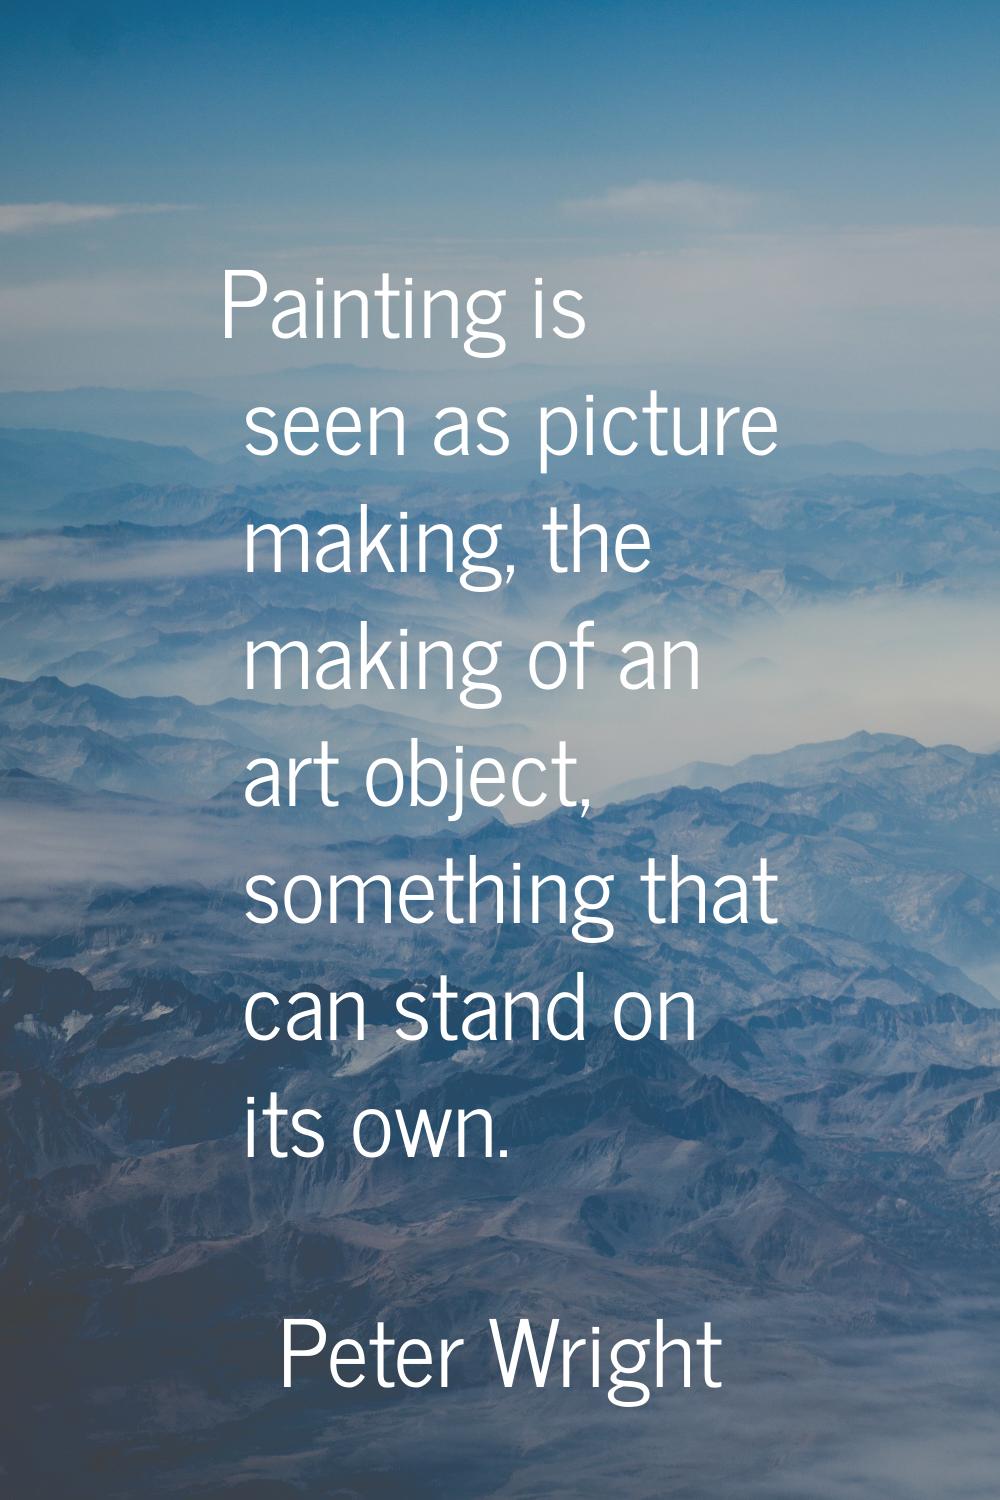 Painting is seen as picture making, the making of an art object, something that can stand on its ow